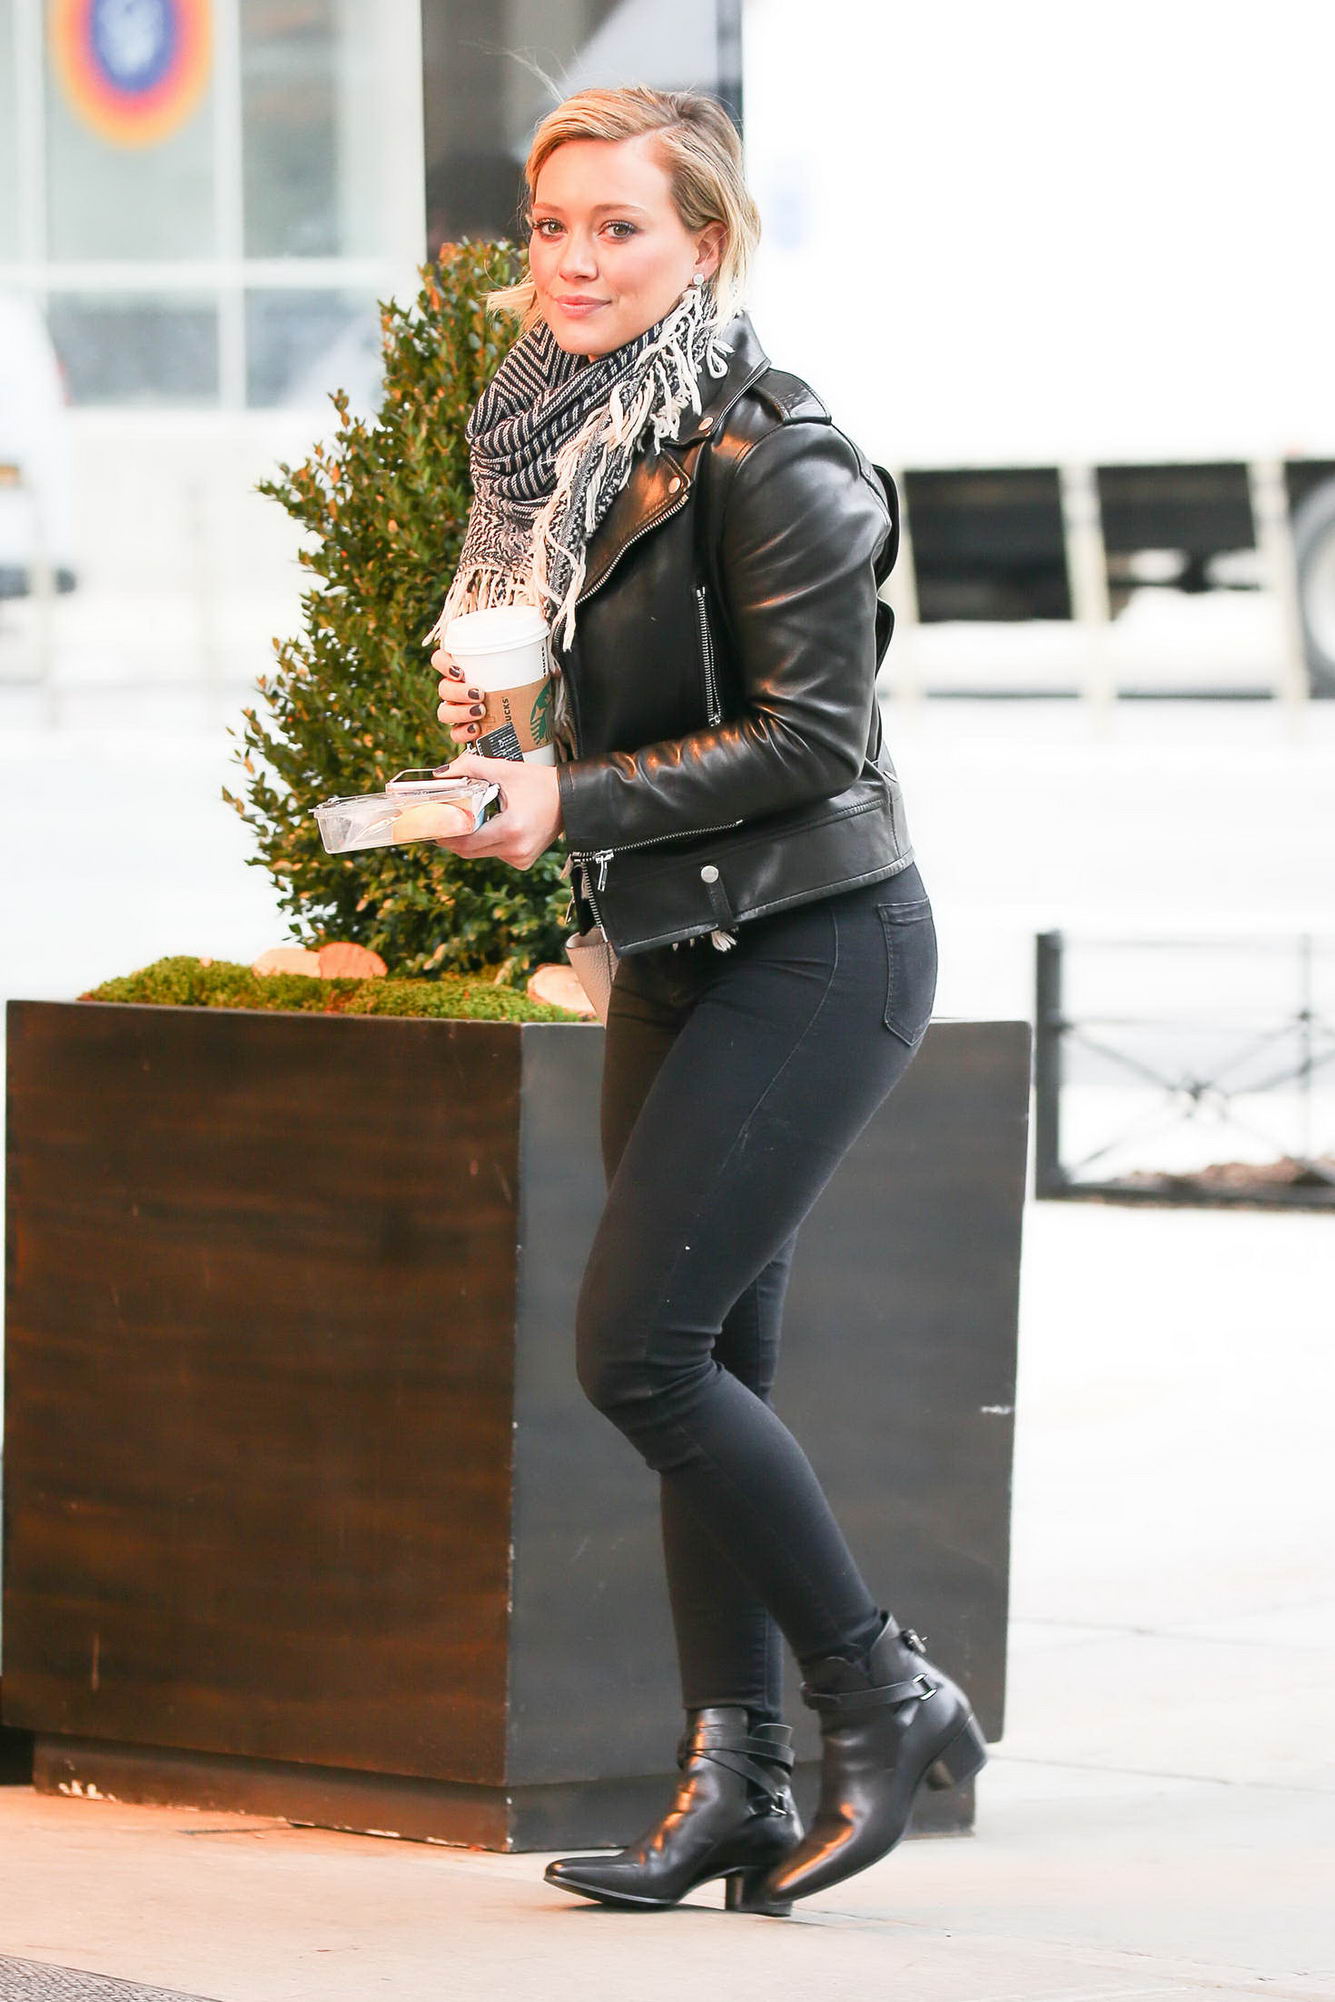 Hilary Duff at her Hotel in NYC